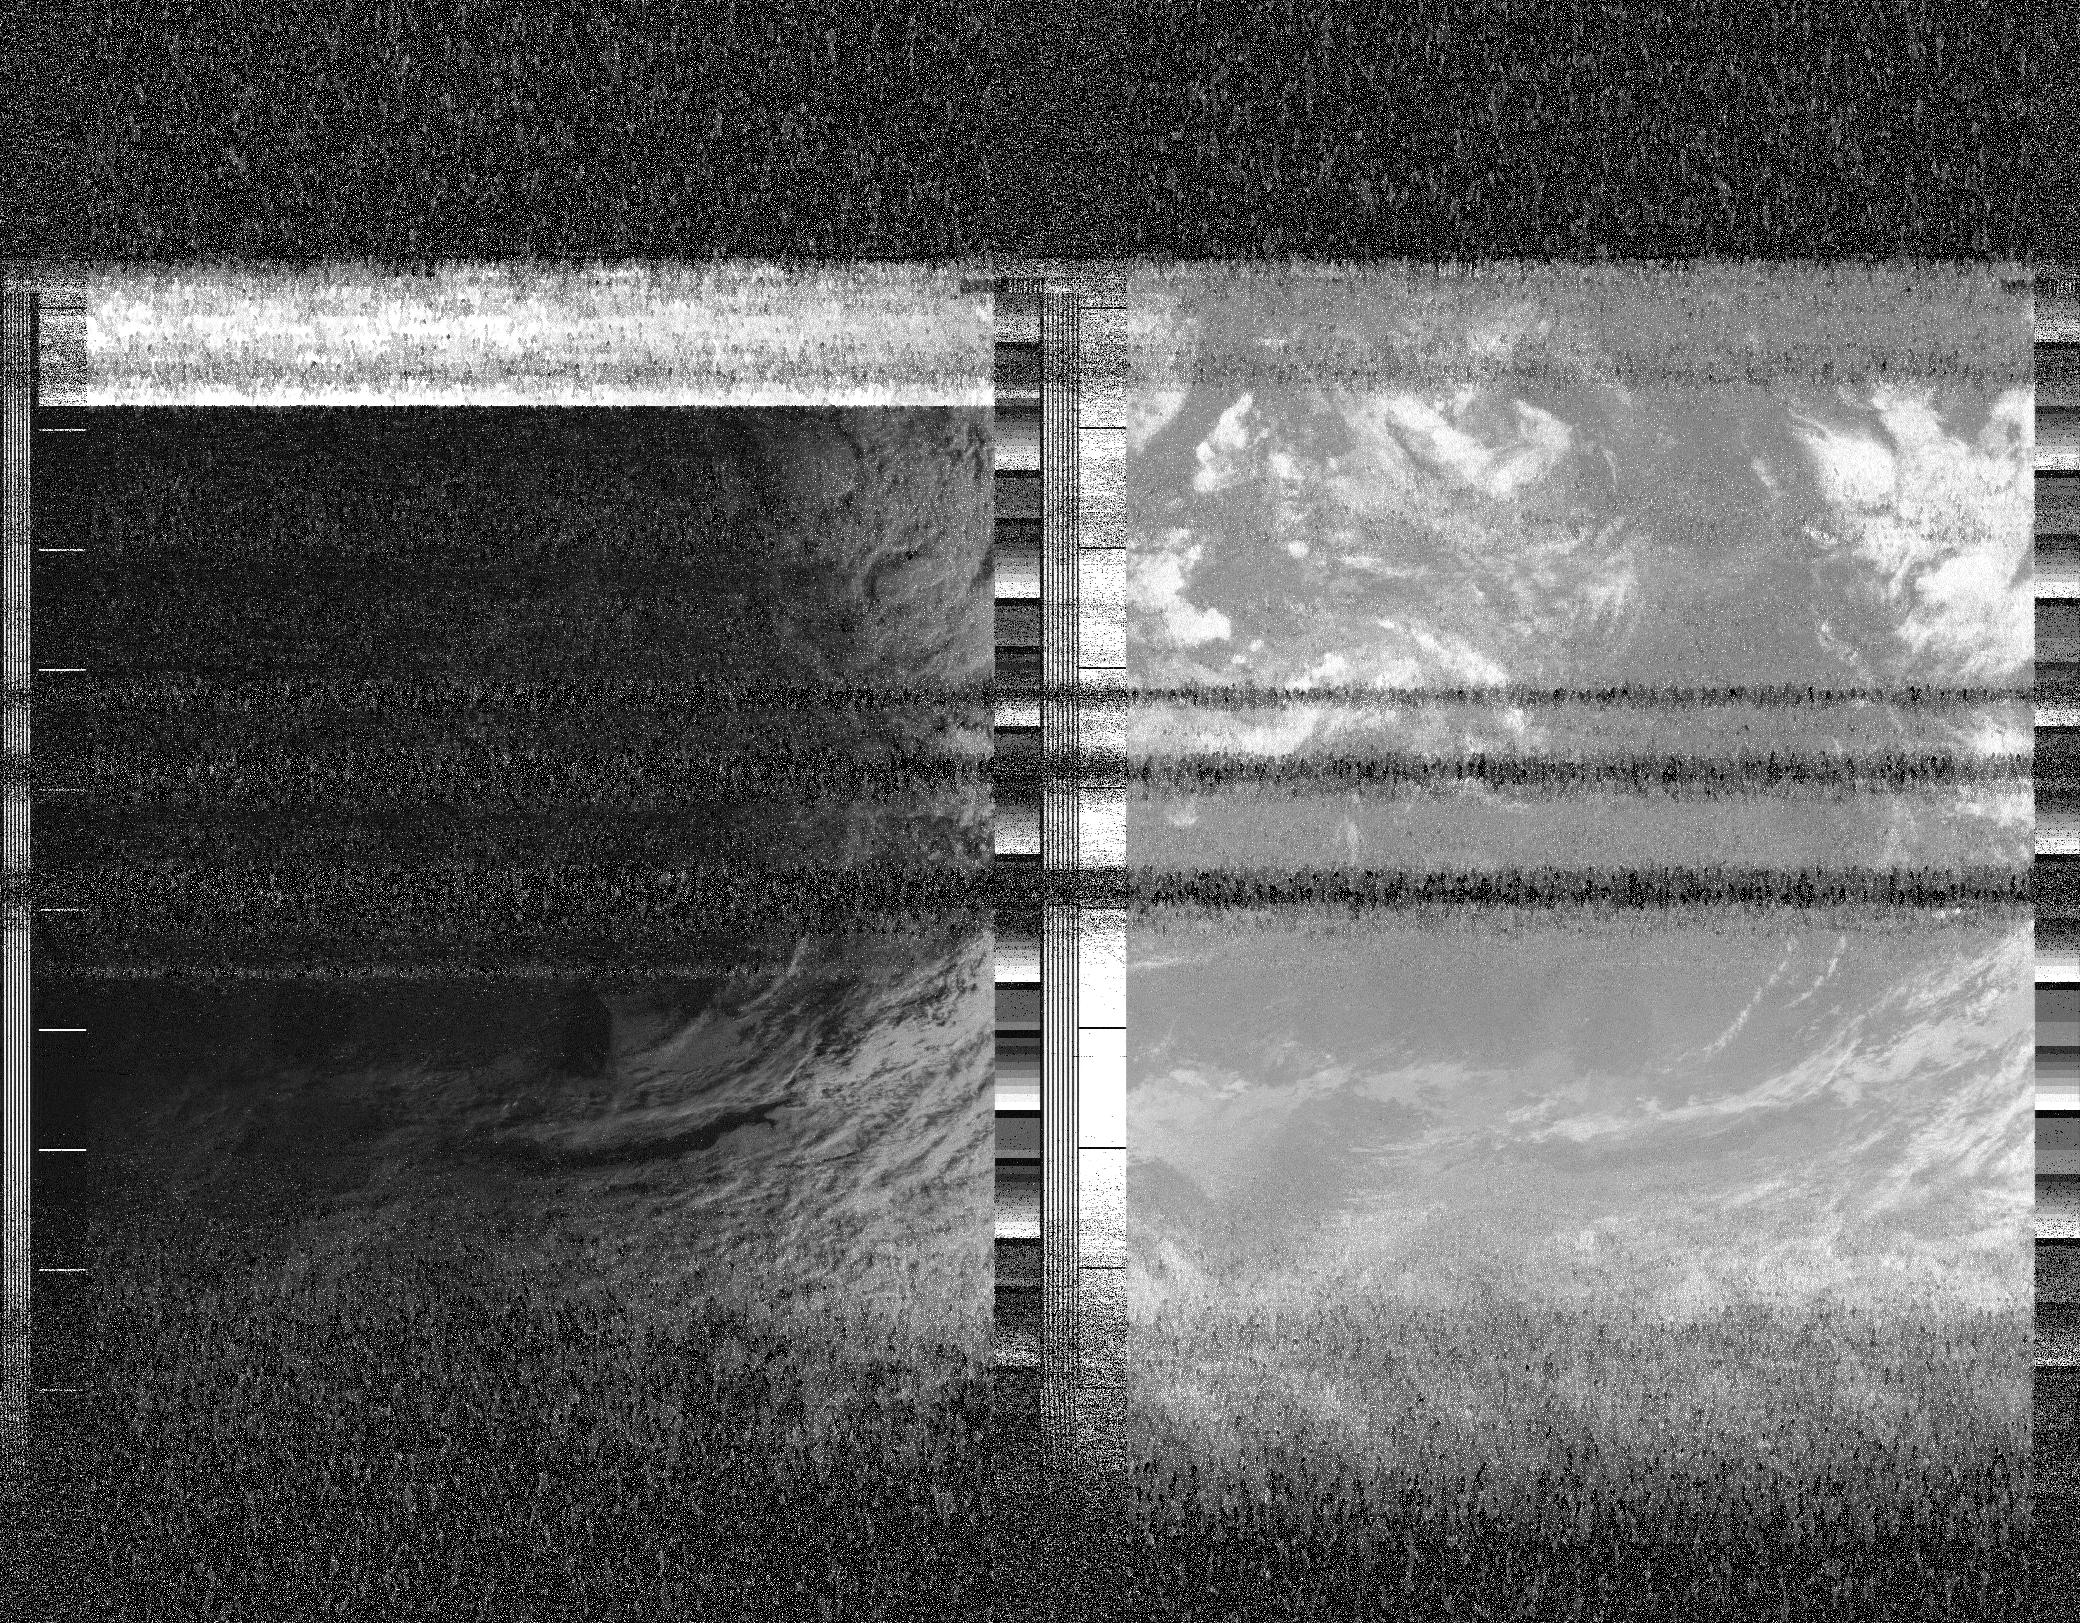 An image captured from a NOAA-18 satellite with lots of noise